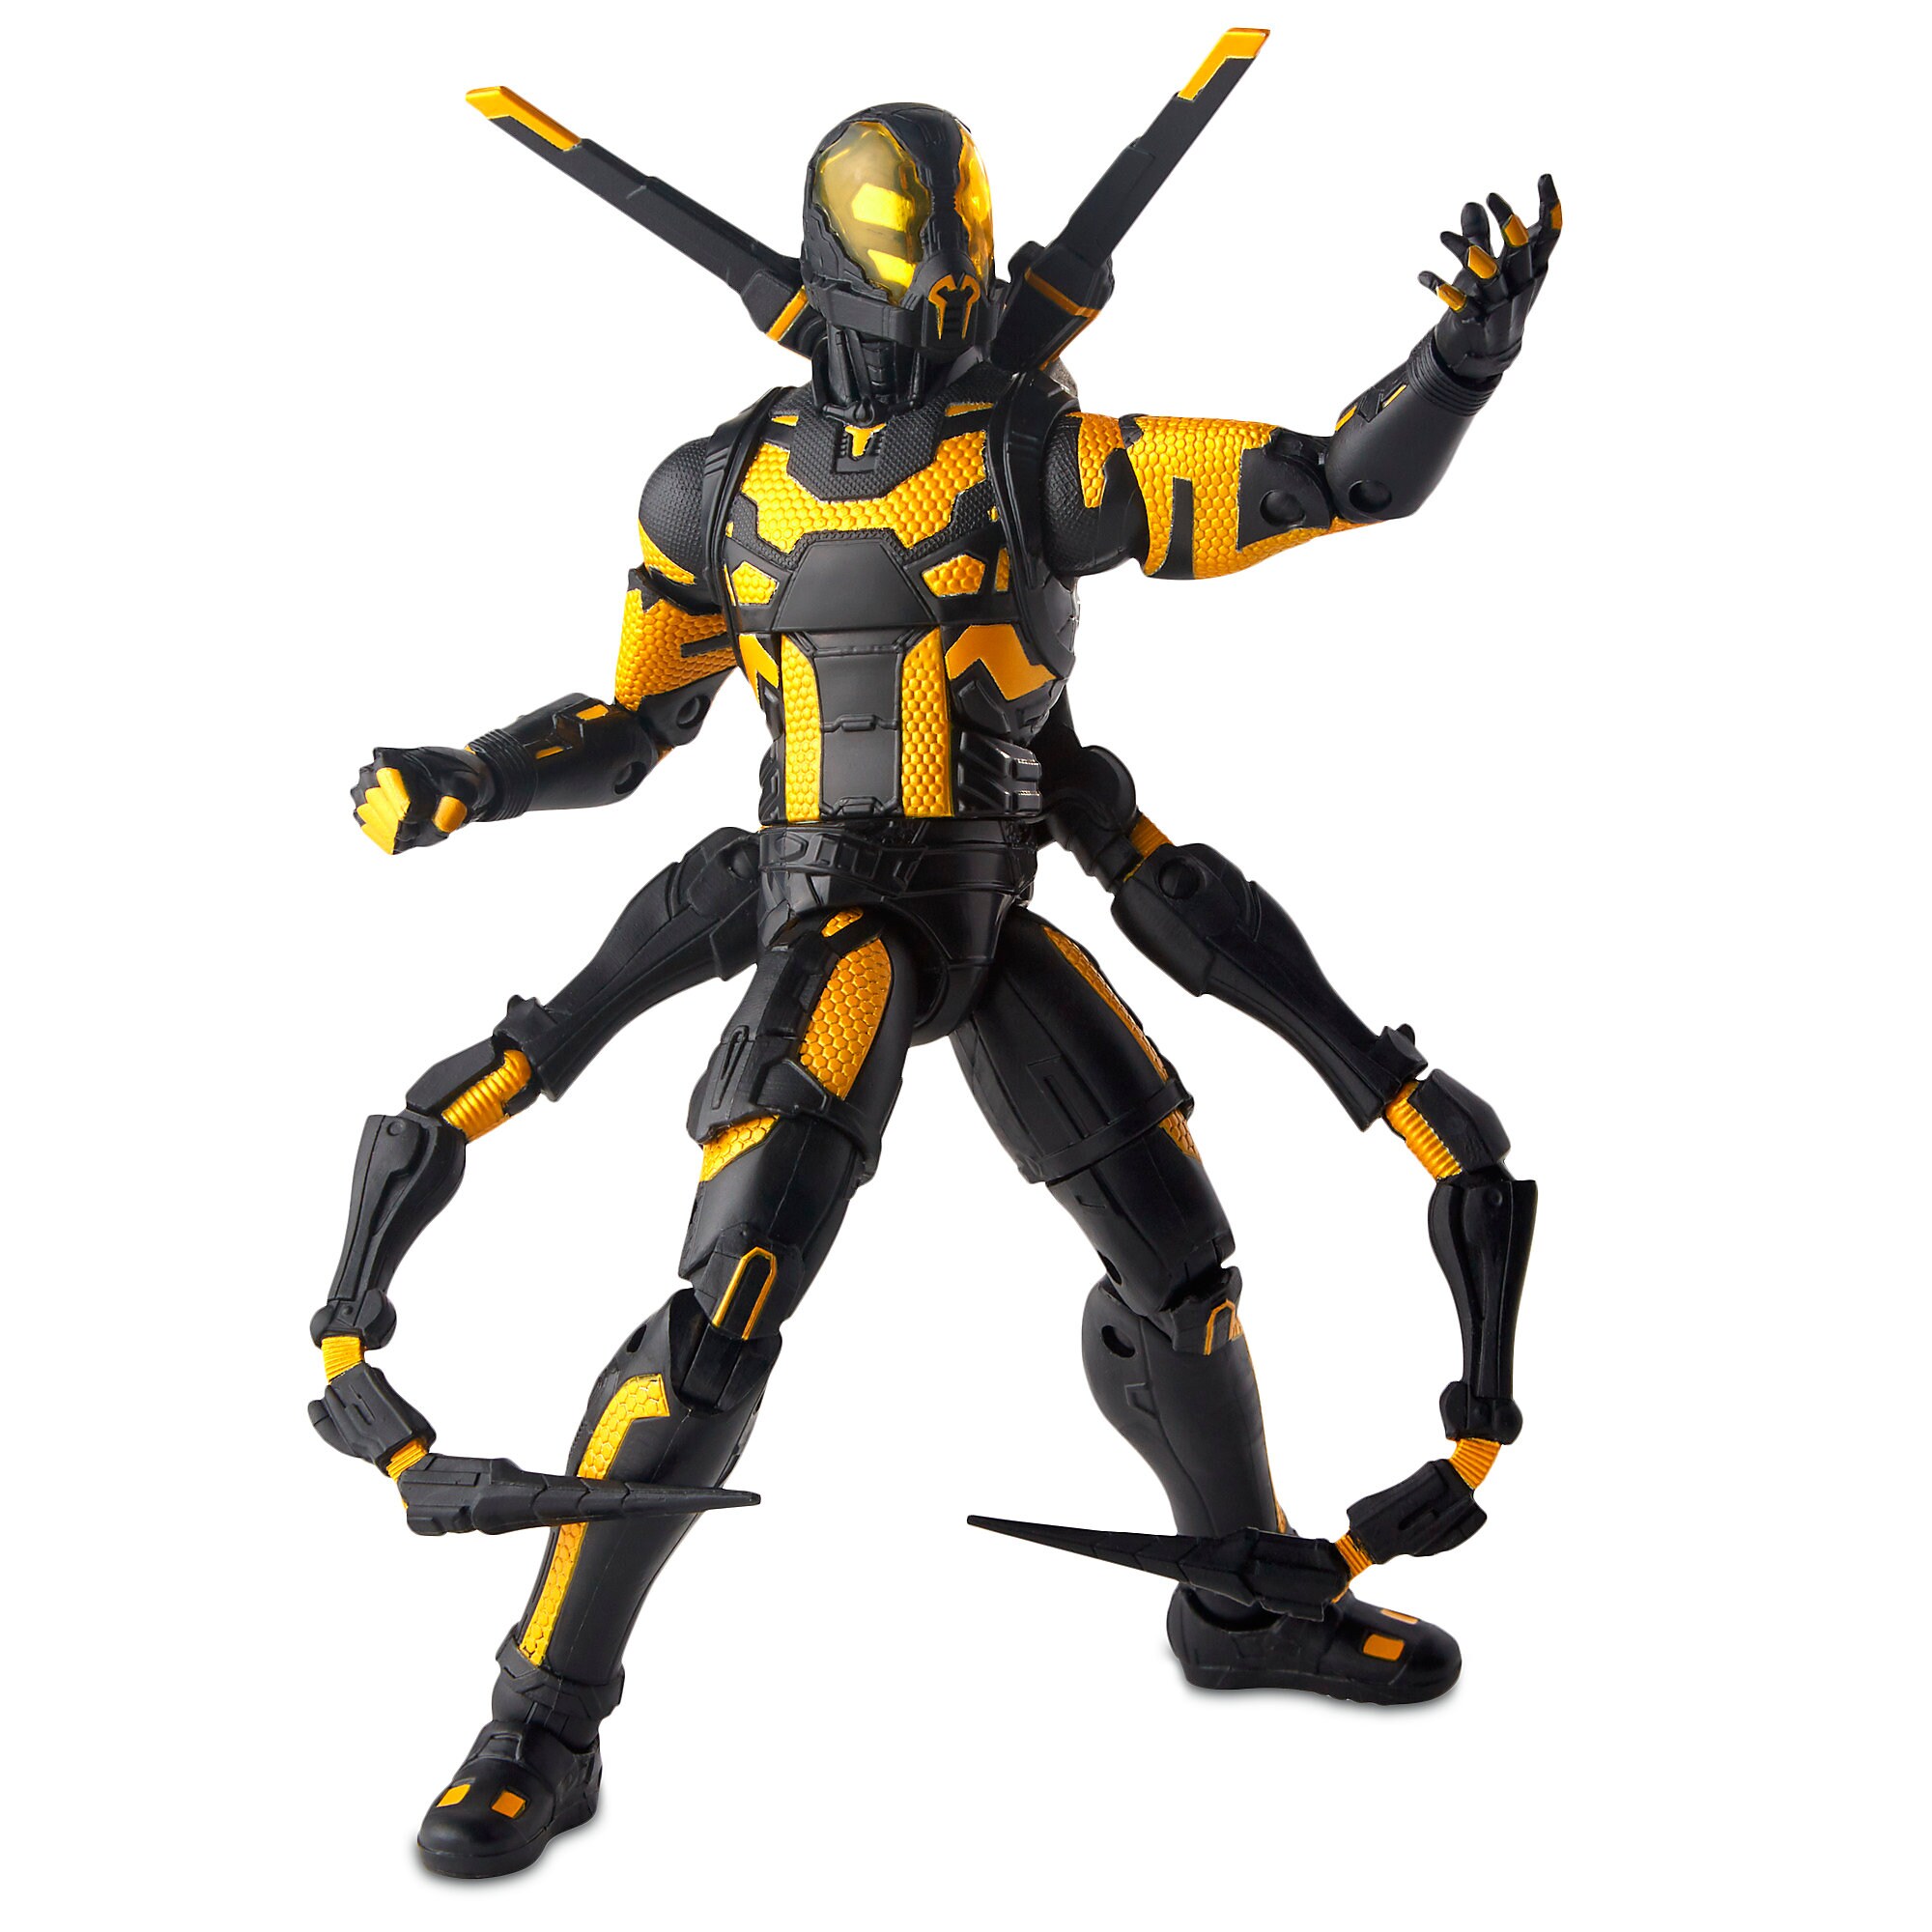 Ant-Man and Yellow Jacket Action Figure Set - Legends Series - Marvel Studios 10th Anniversary